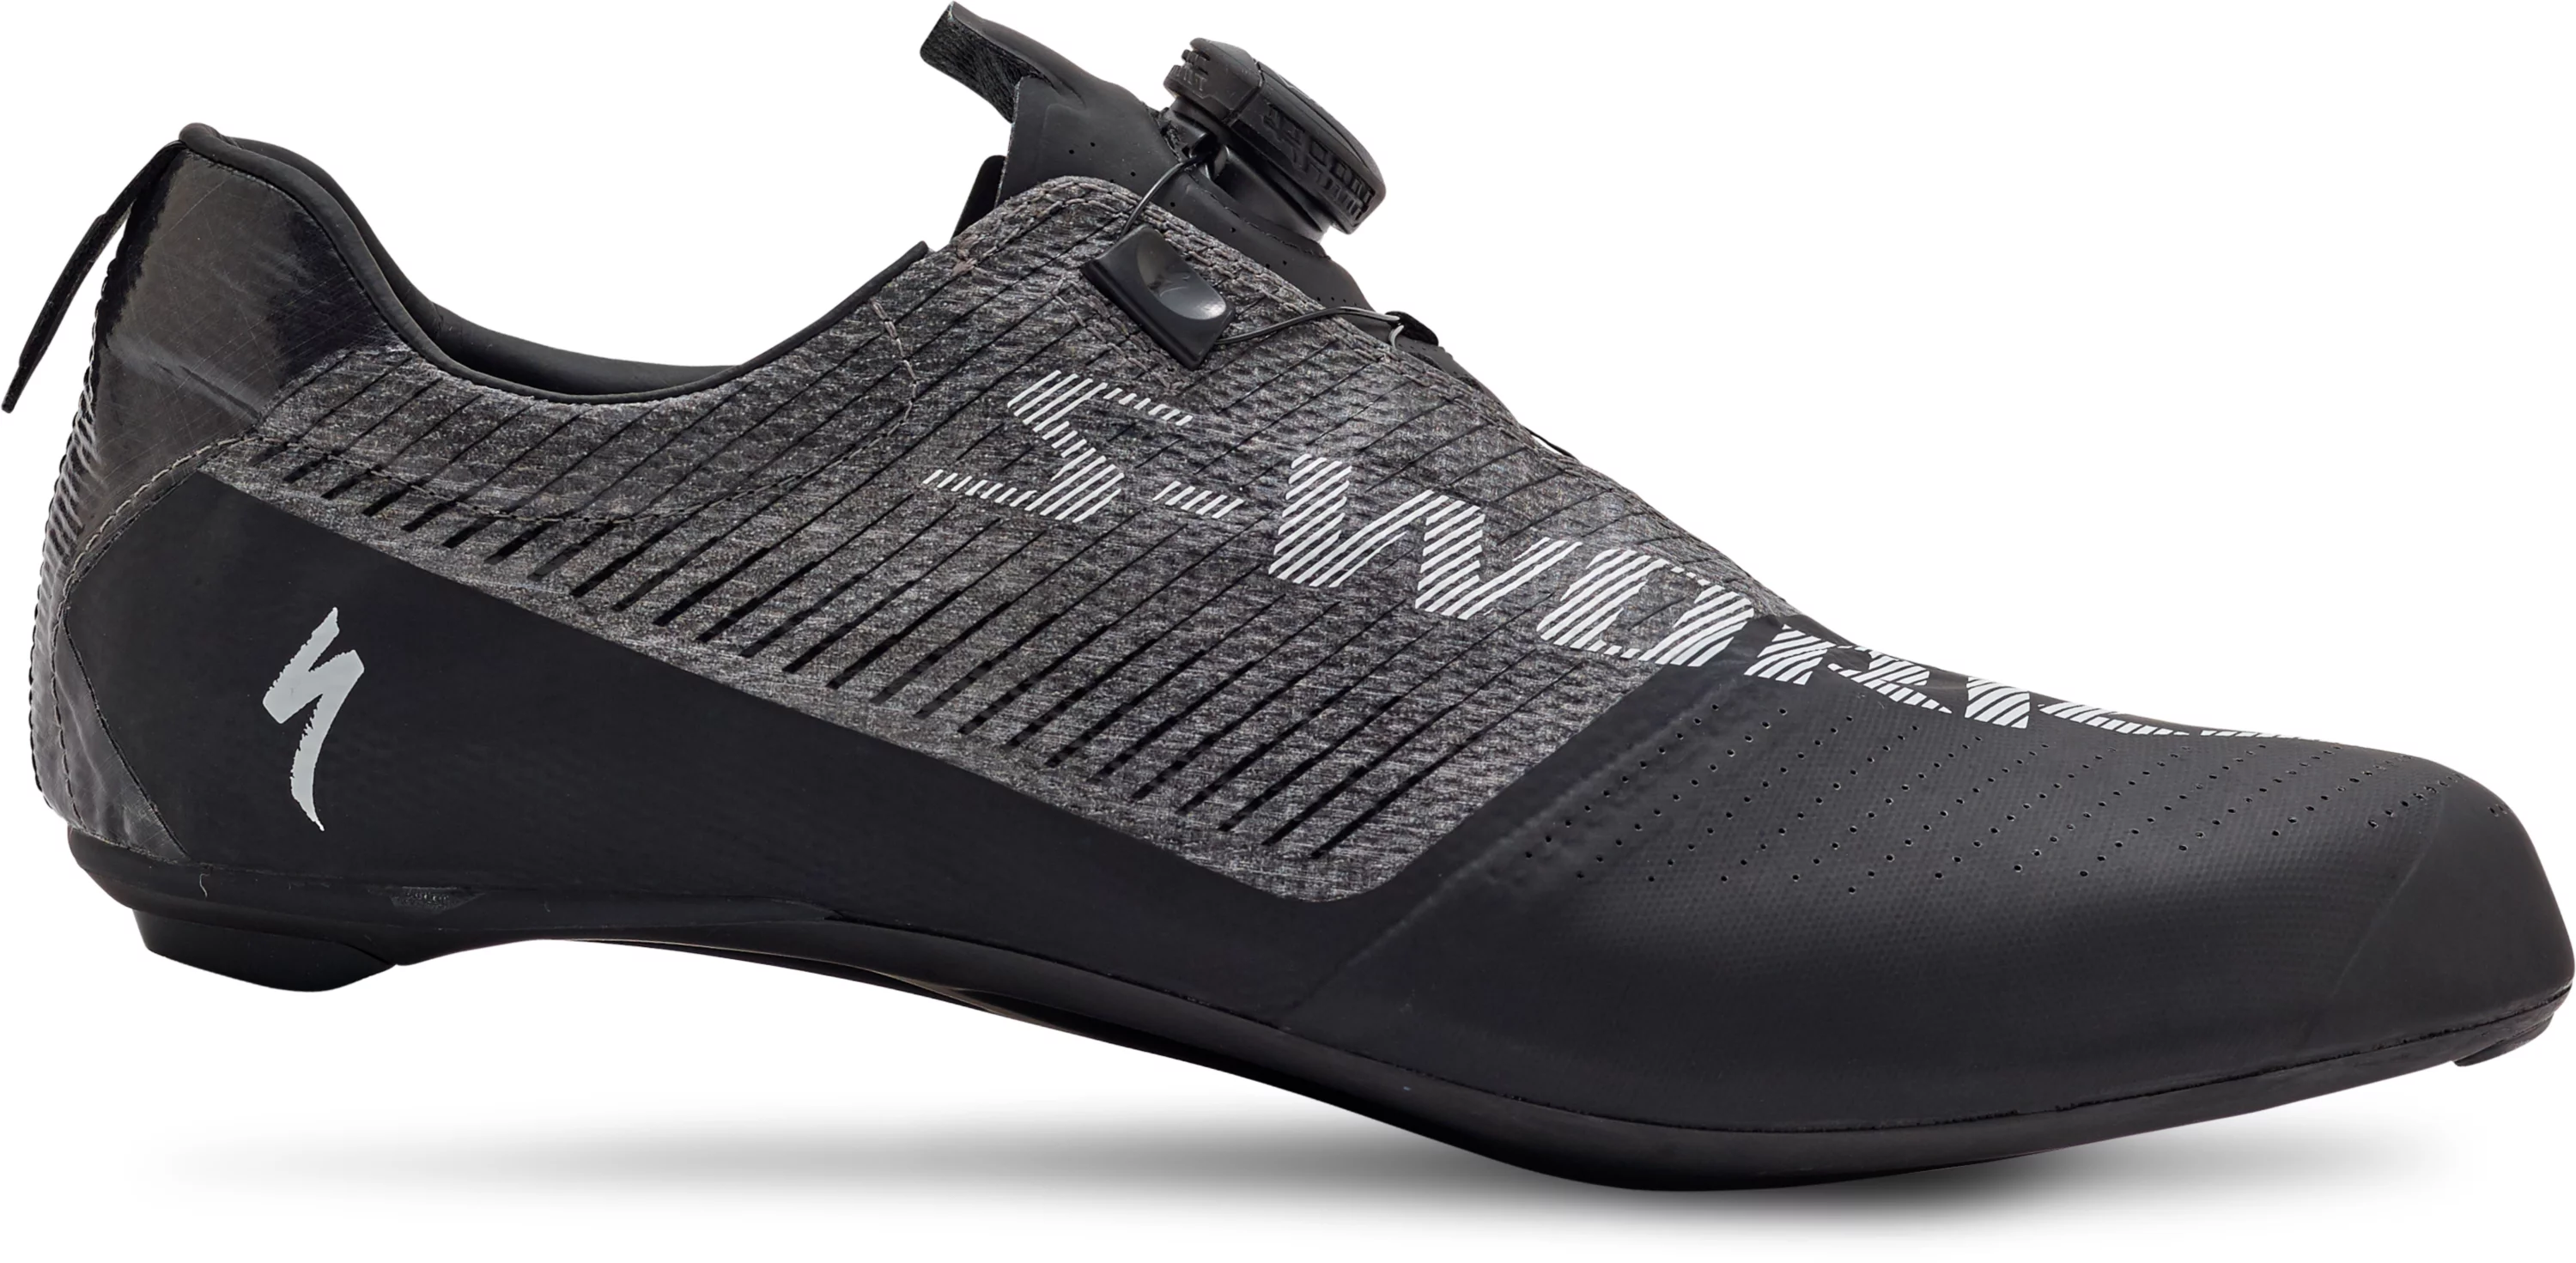 S-Works_EXOS_Road_Shoes